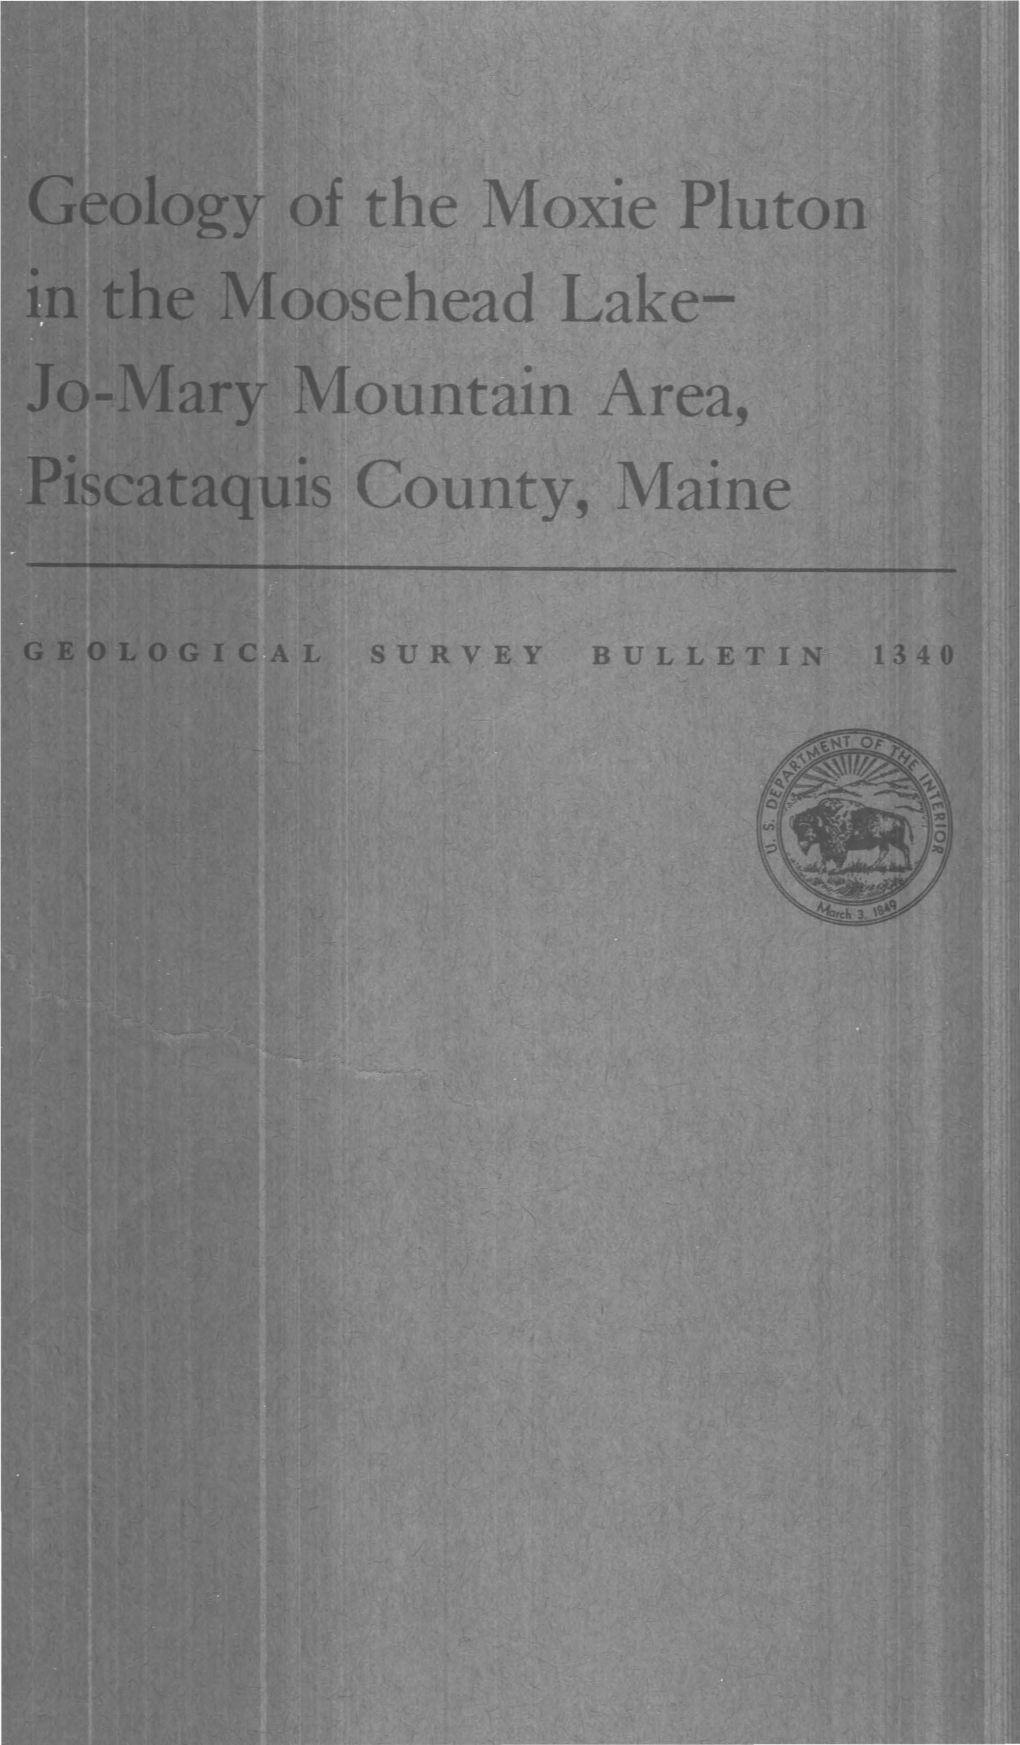 In the Moosehead Lake­ ,Jo-Mary Mountain Area, Piscataquis County, Maine